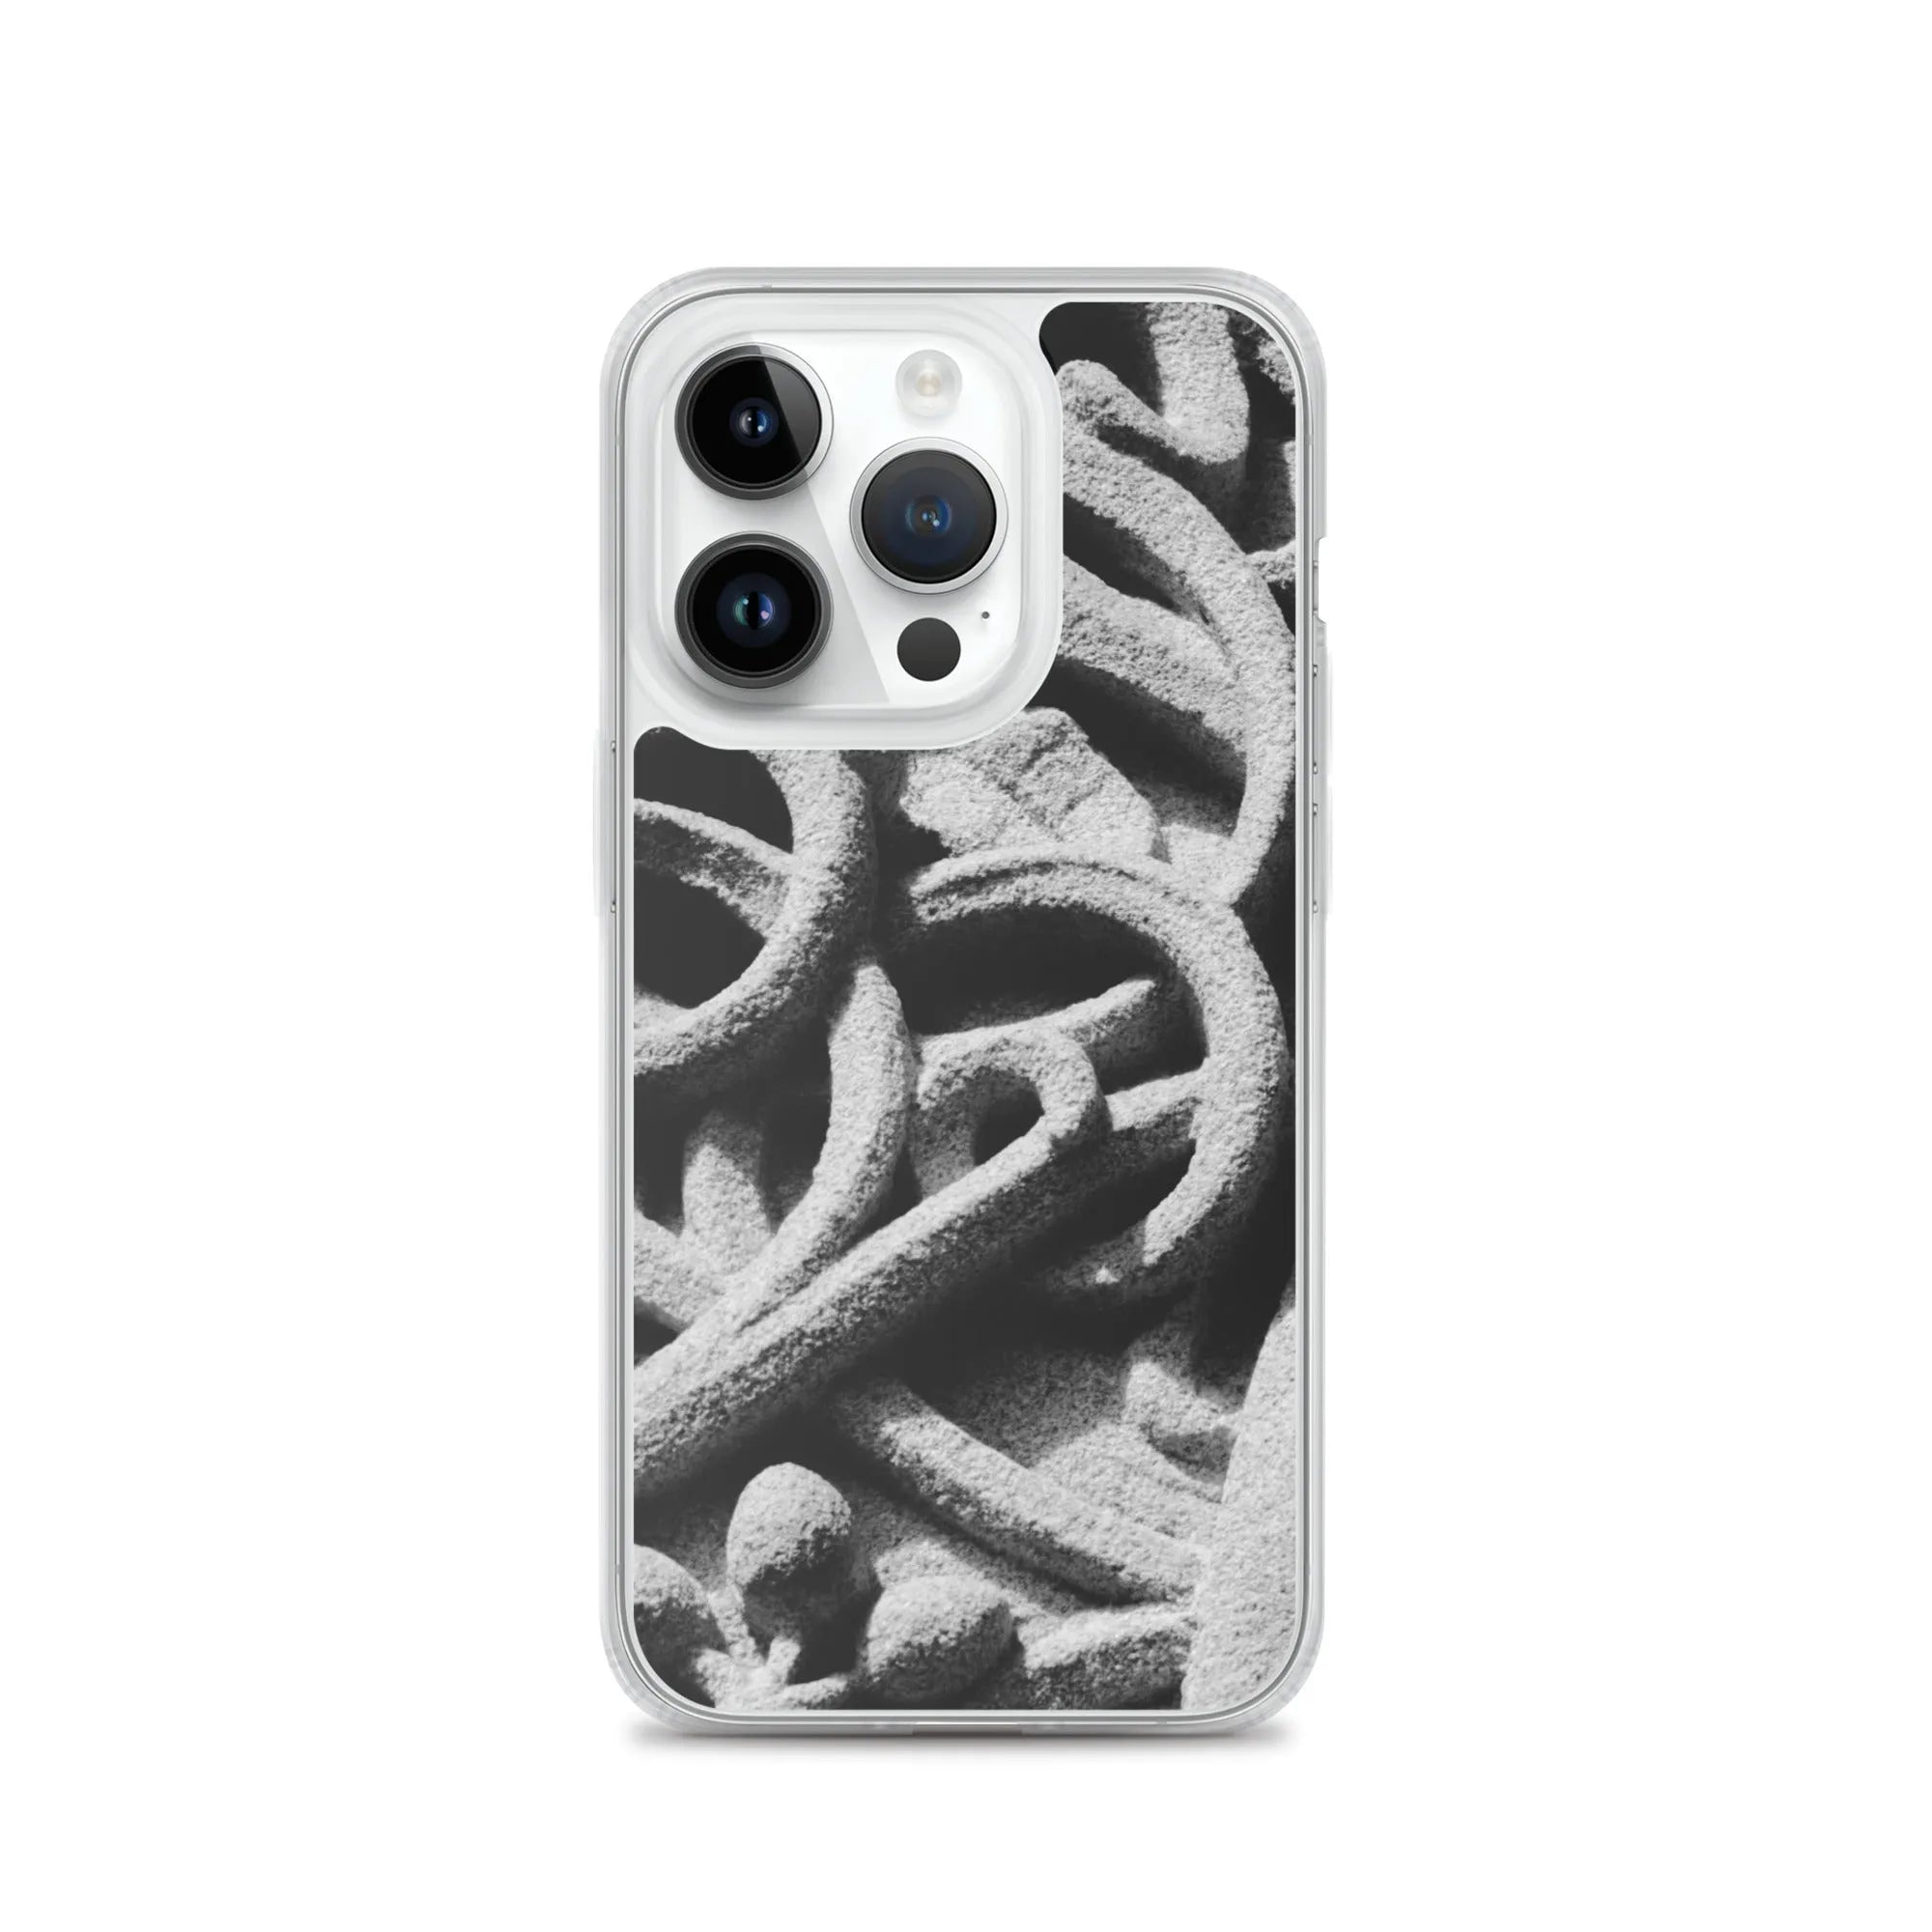 Labyrinth - Designer Travels Art Iphone Case - Black And White - Iphone 14 Pro - Mobile Phone Cases - Aesthetic Art